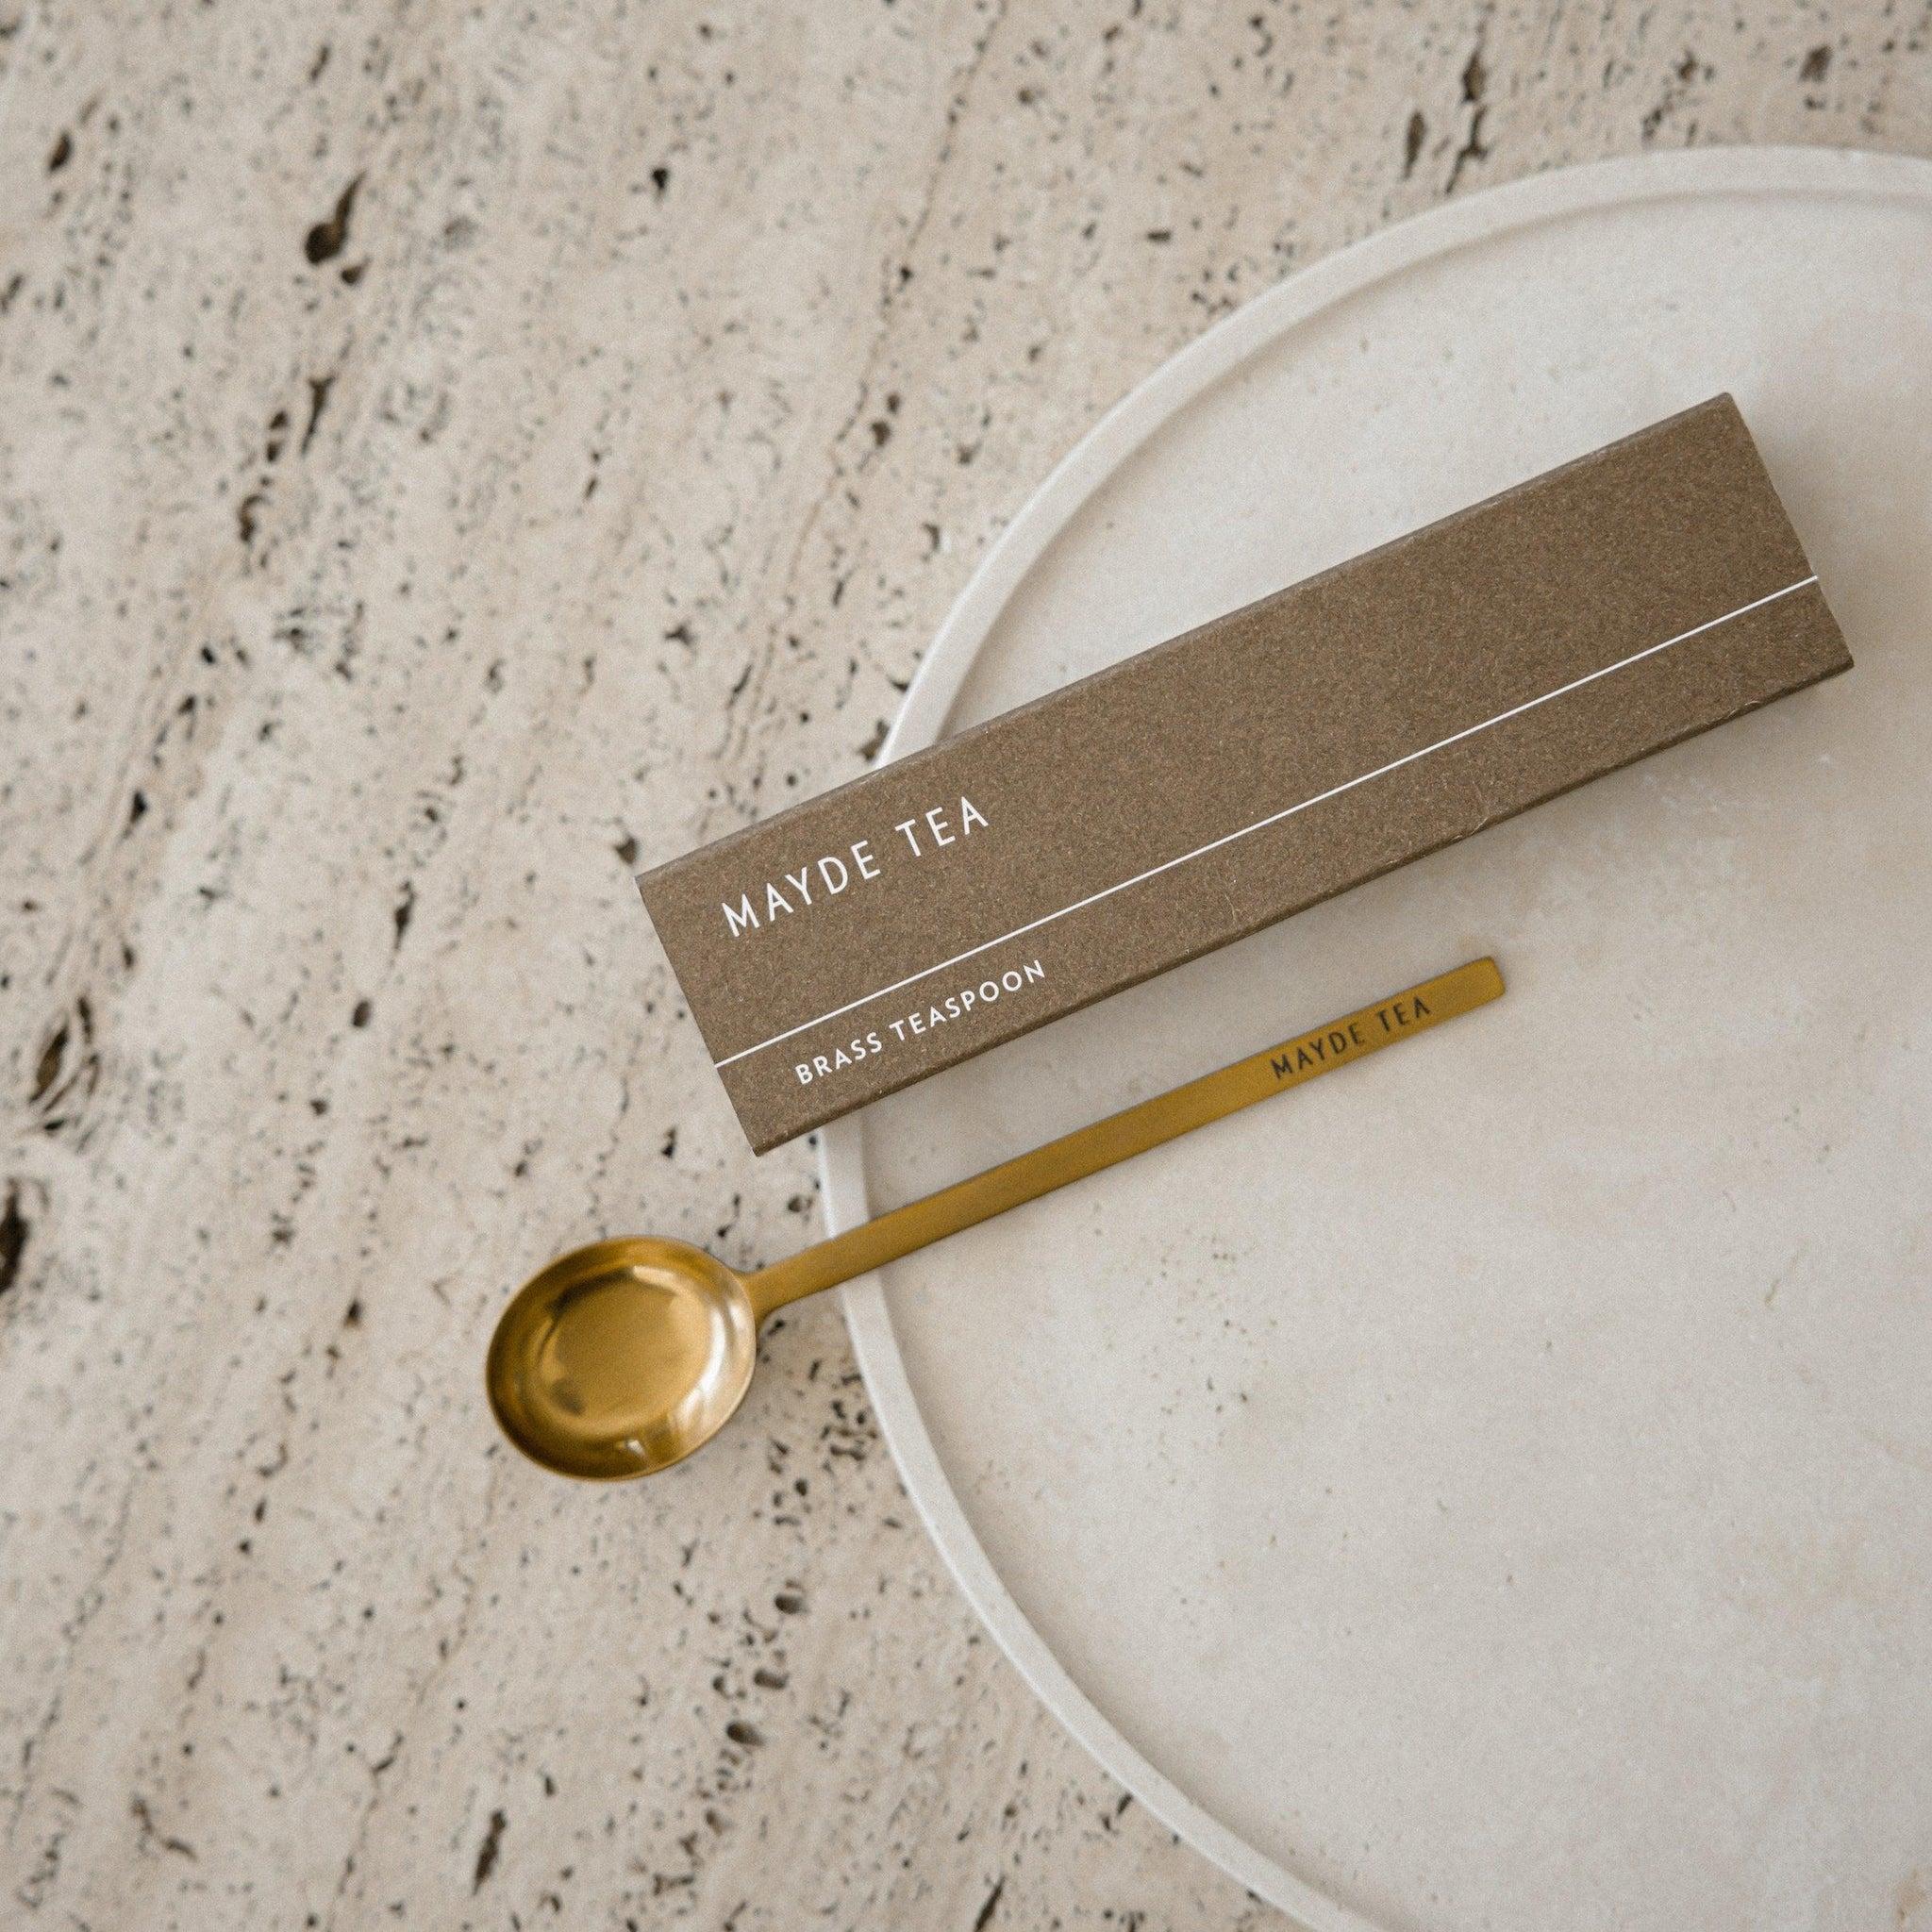 Crafted with from high grade stainless steel with a brass-look coating, our teaspoon combines sophistication, quality and function.